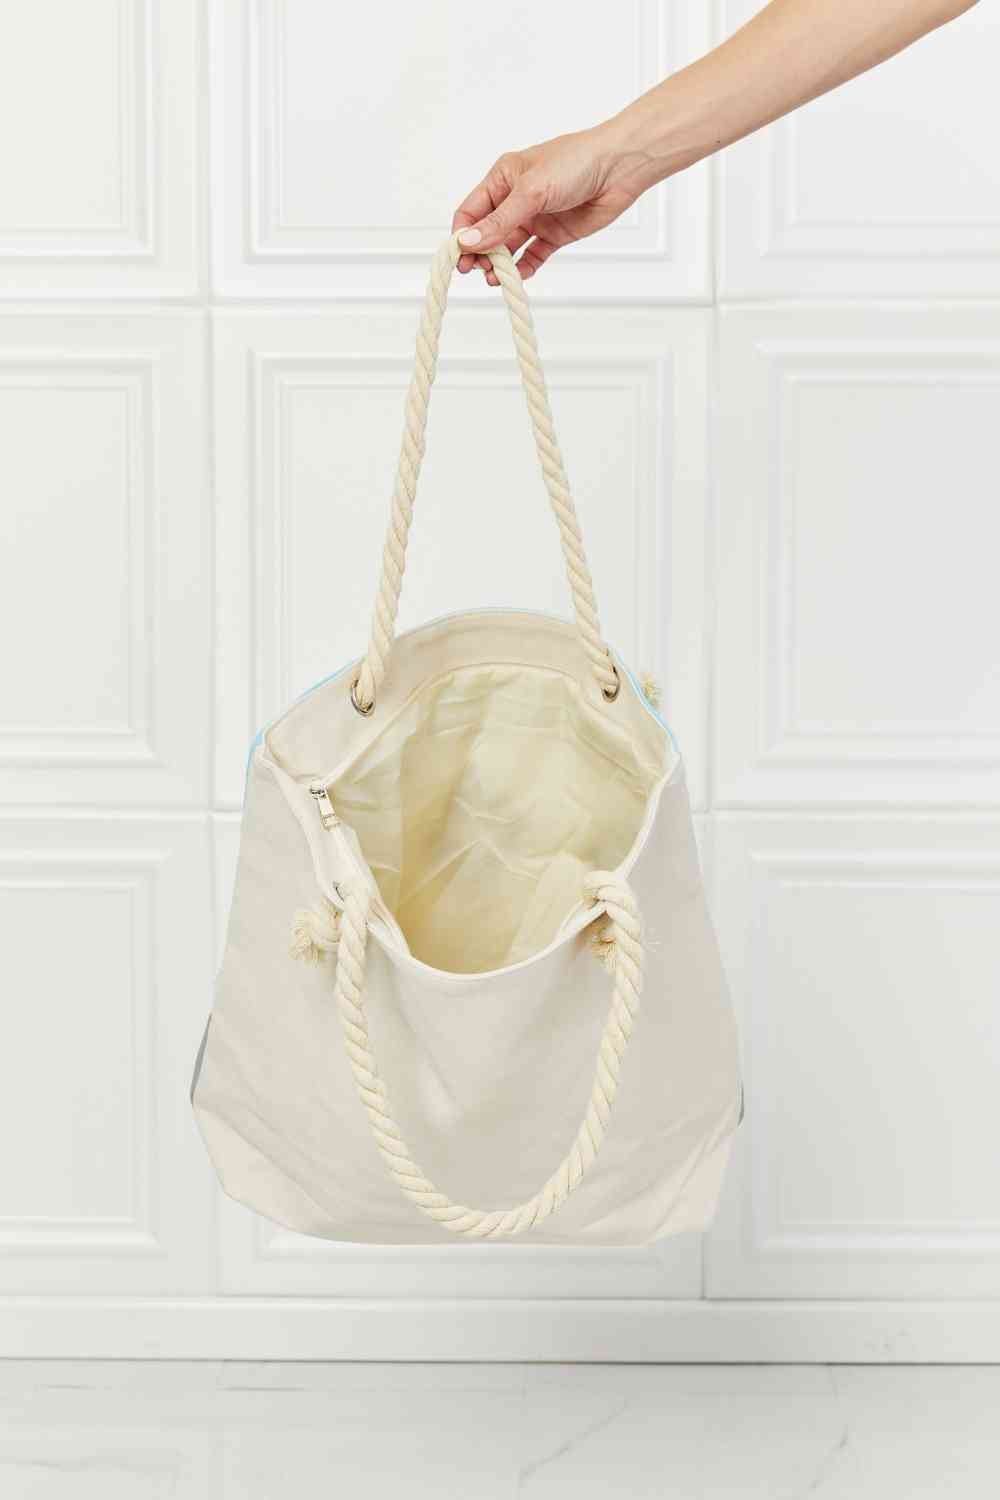 Justin Taylor In The Sand Tassel Tote Bag - BloomBliss.com